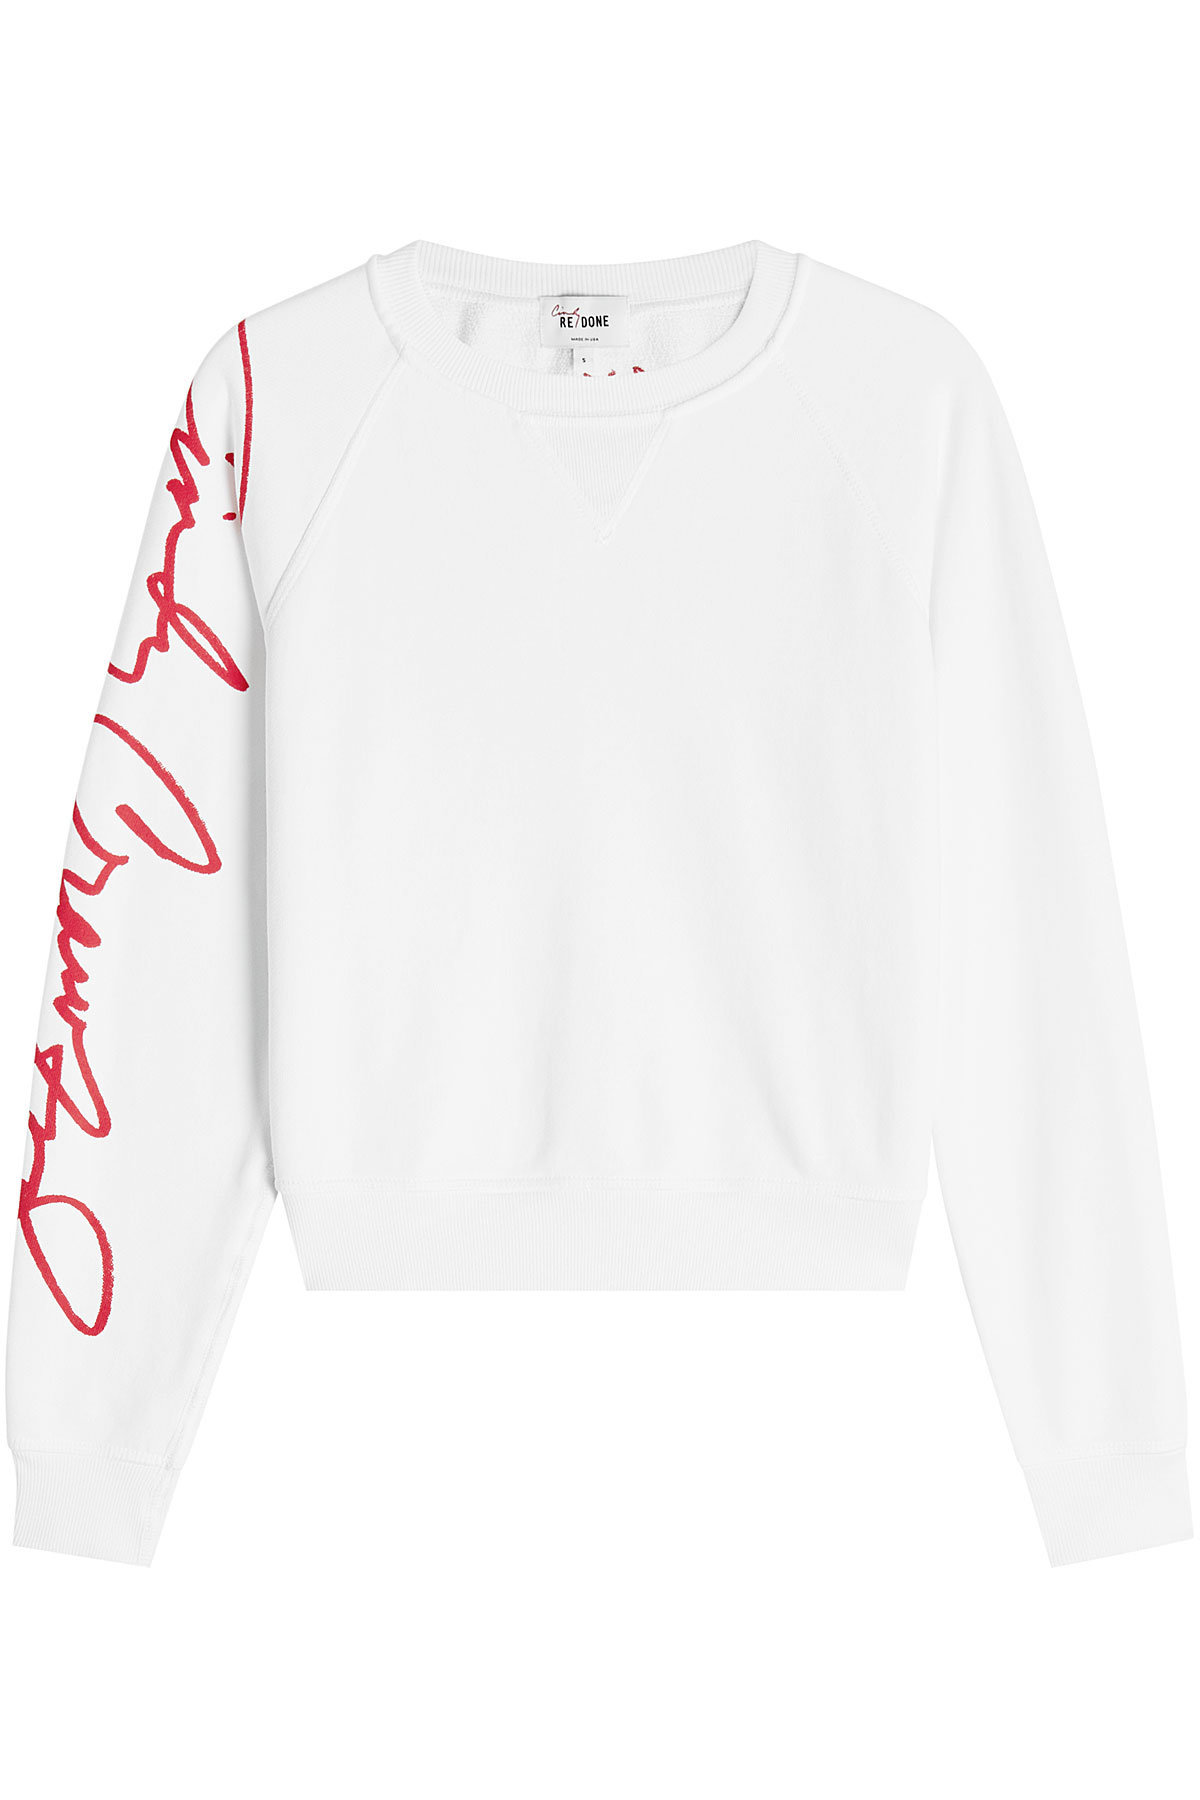 Cindy Crawford Cotton Sweat Top by RE/DONE